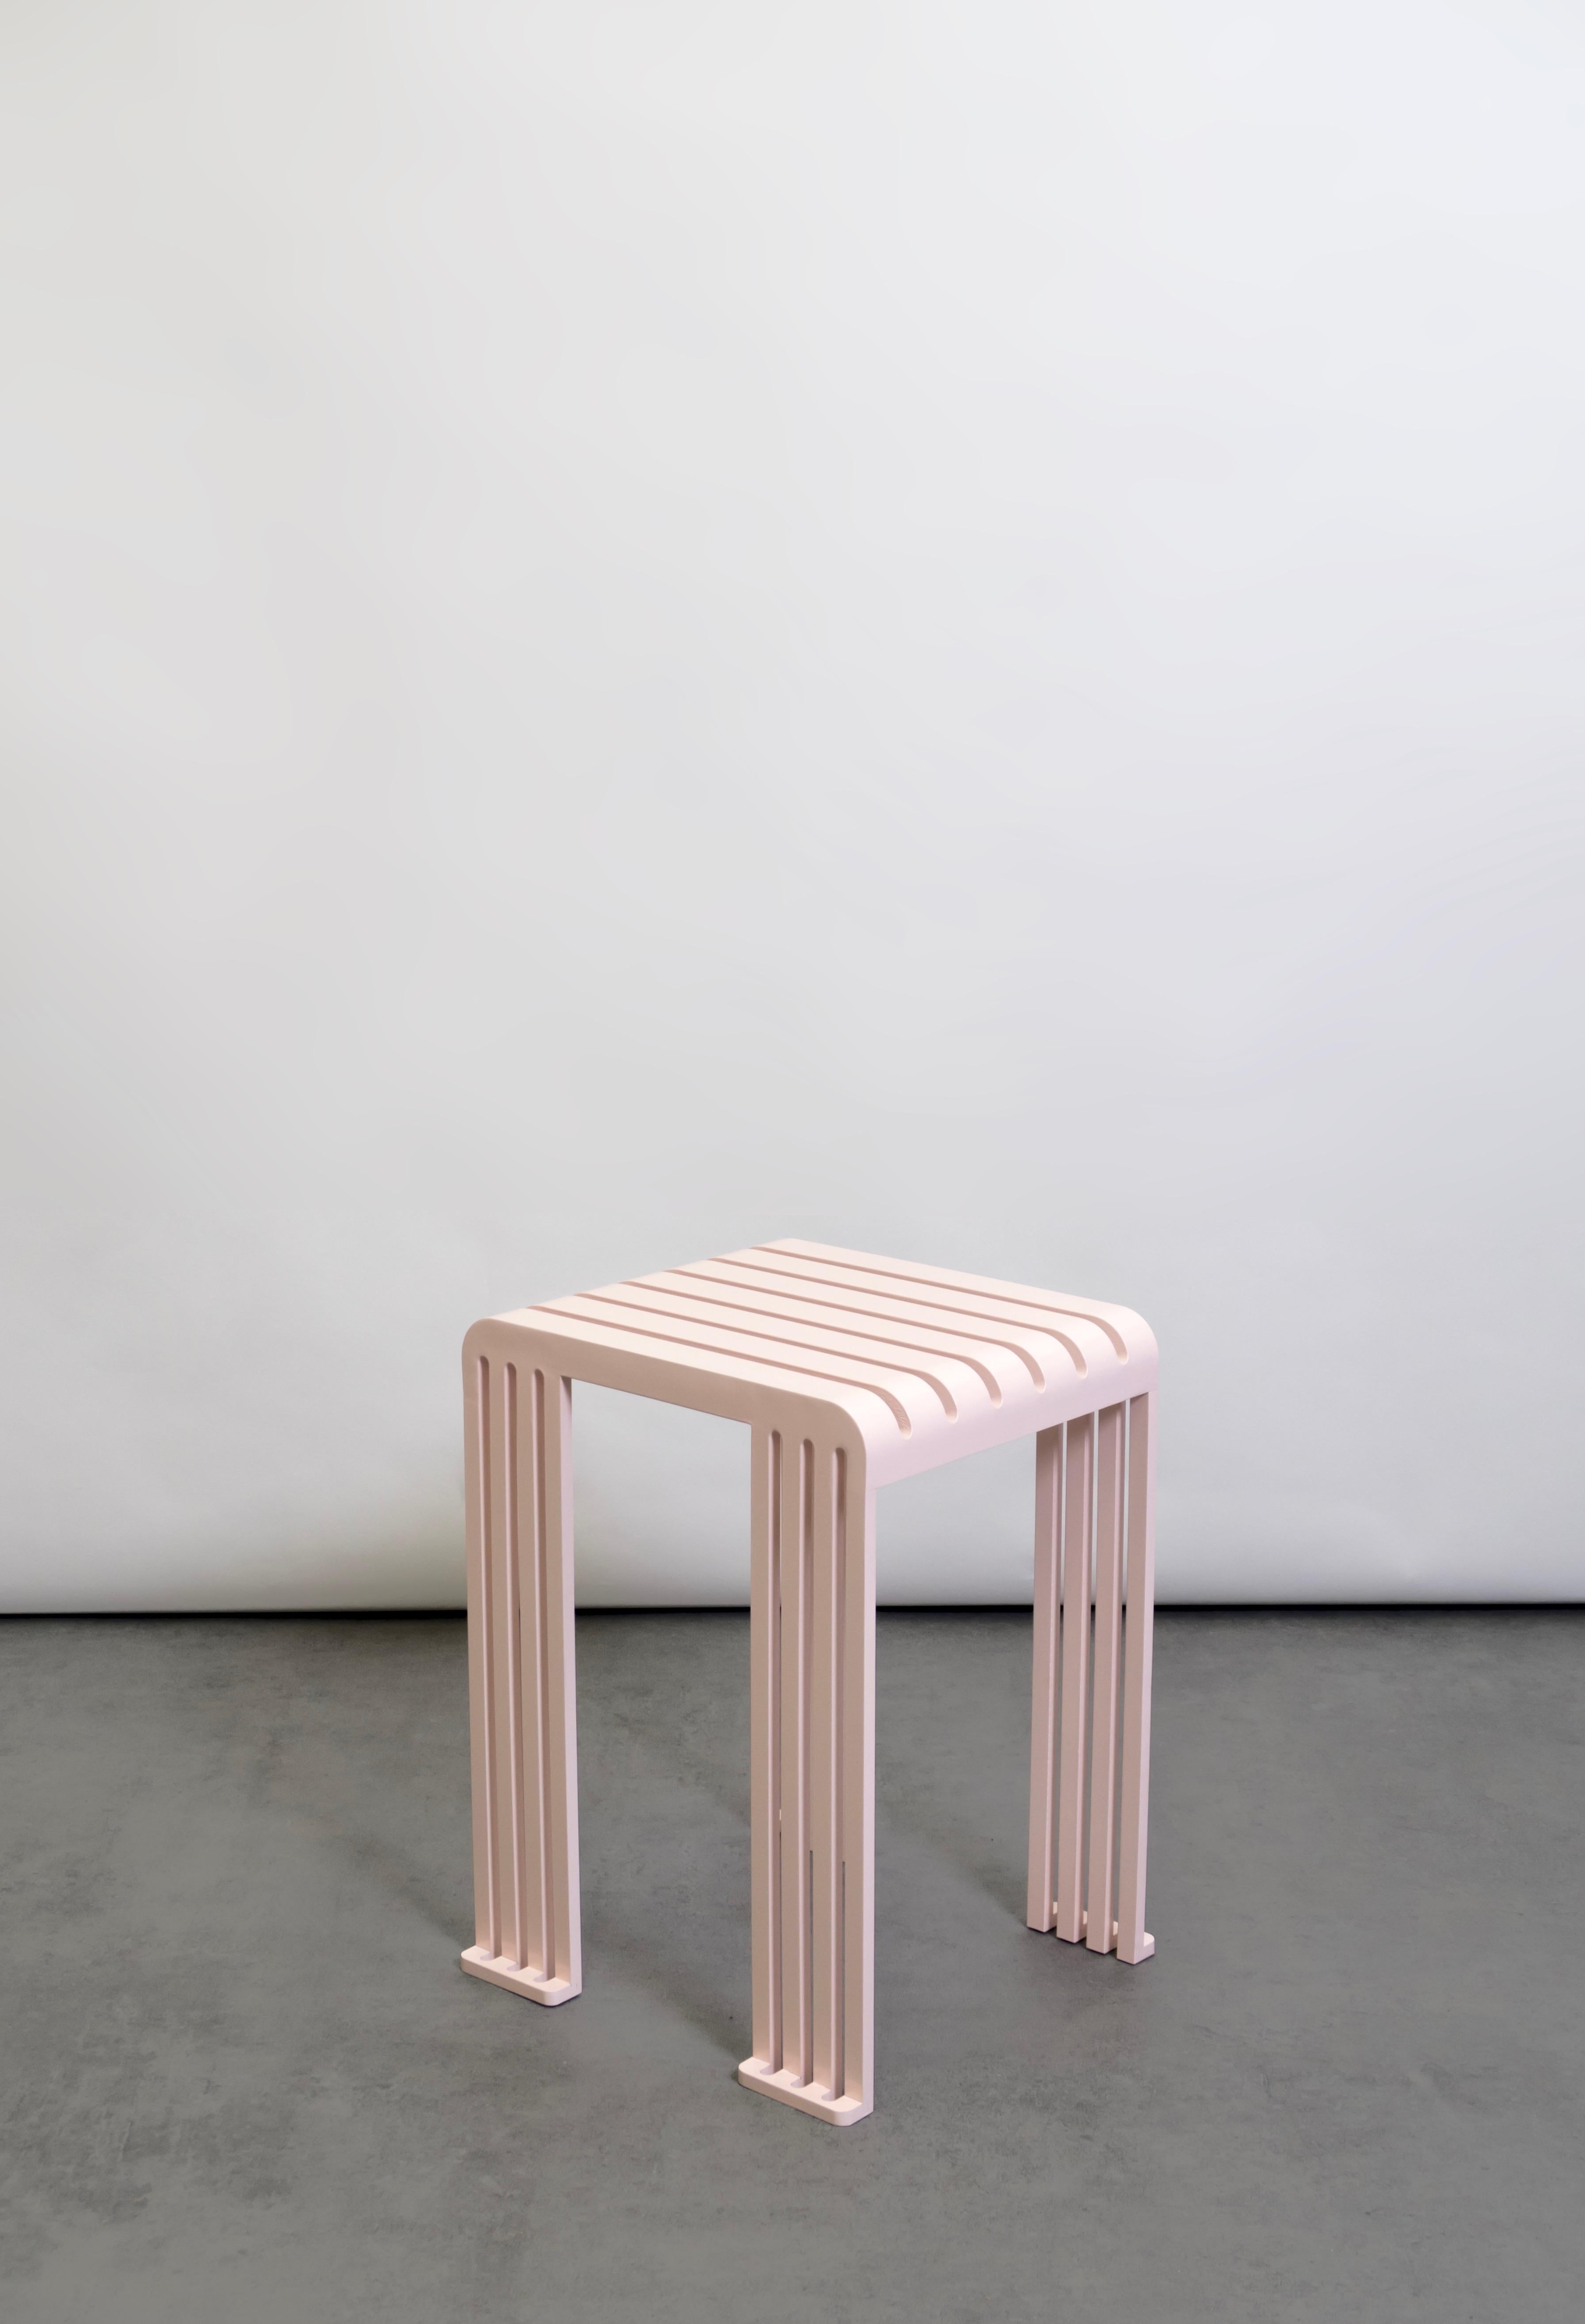 Aluminium Tootoo stool by Helder Barbosa
Materials: Aluminium
Dimensions: 34 x 29 x 45 cm
Indoor and outdoor.

Trained as a craftsman (école Boulle, 2014), Helder Barbosa is a designer who lives and works in Paris.
Attracted by minimalist